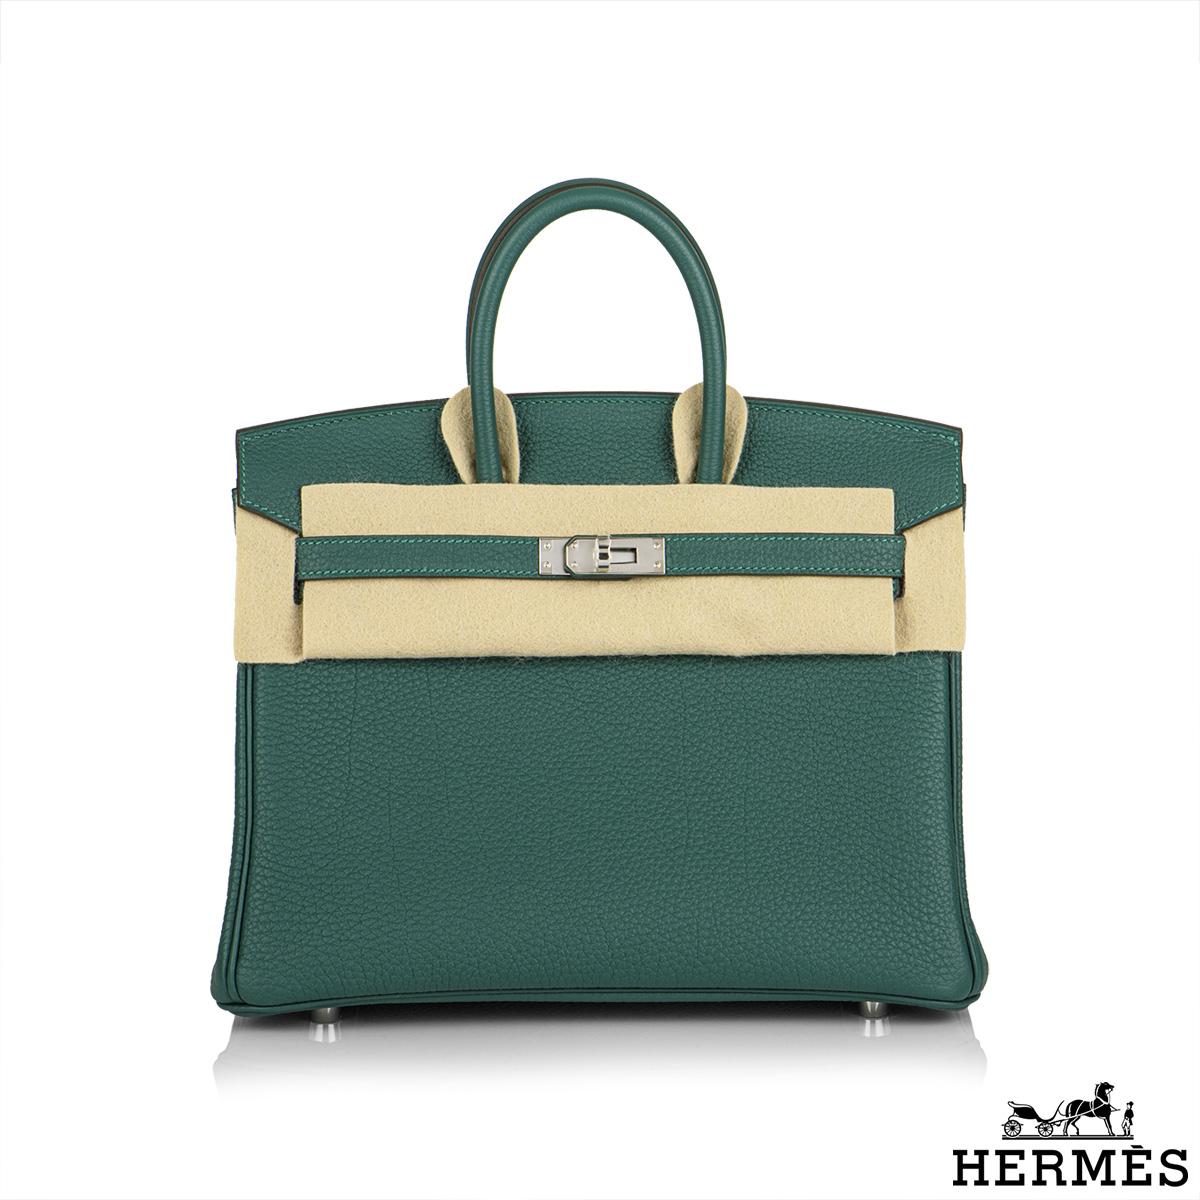 An exquisite Hermès 25cm Birkin bag. The exterior of this birkin is in malachite togo leather with tonal stitching. It features palladium hardware with two straps and front toggle closure. The interior is lined with malachite chevre and has a zip